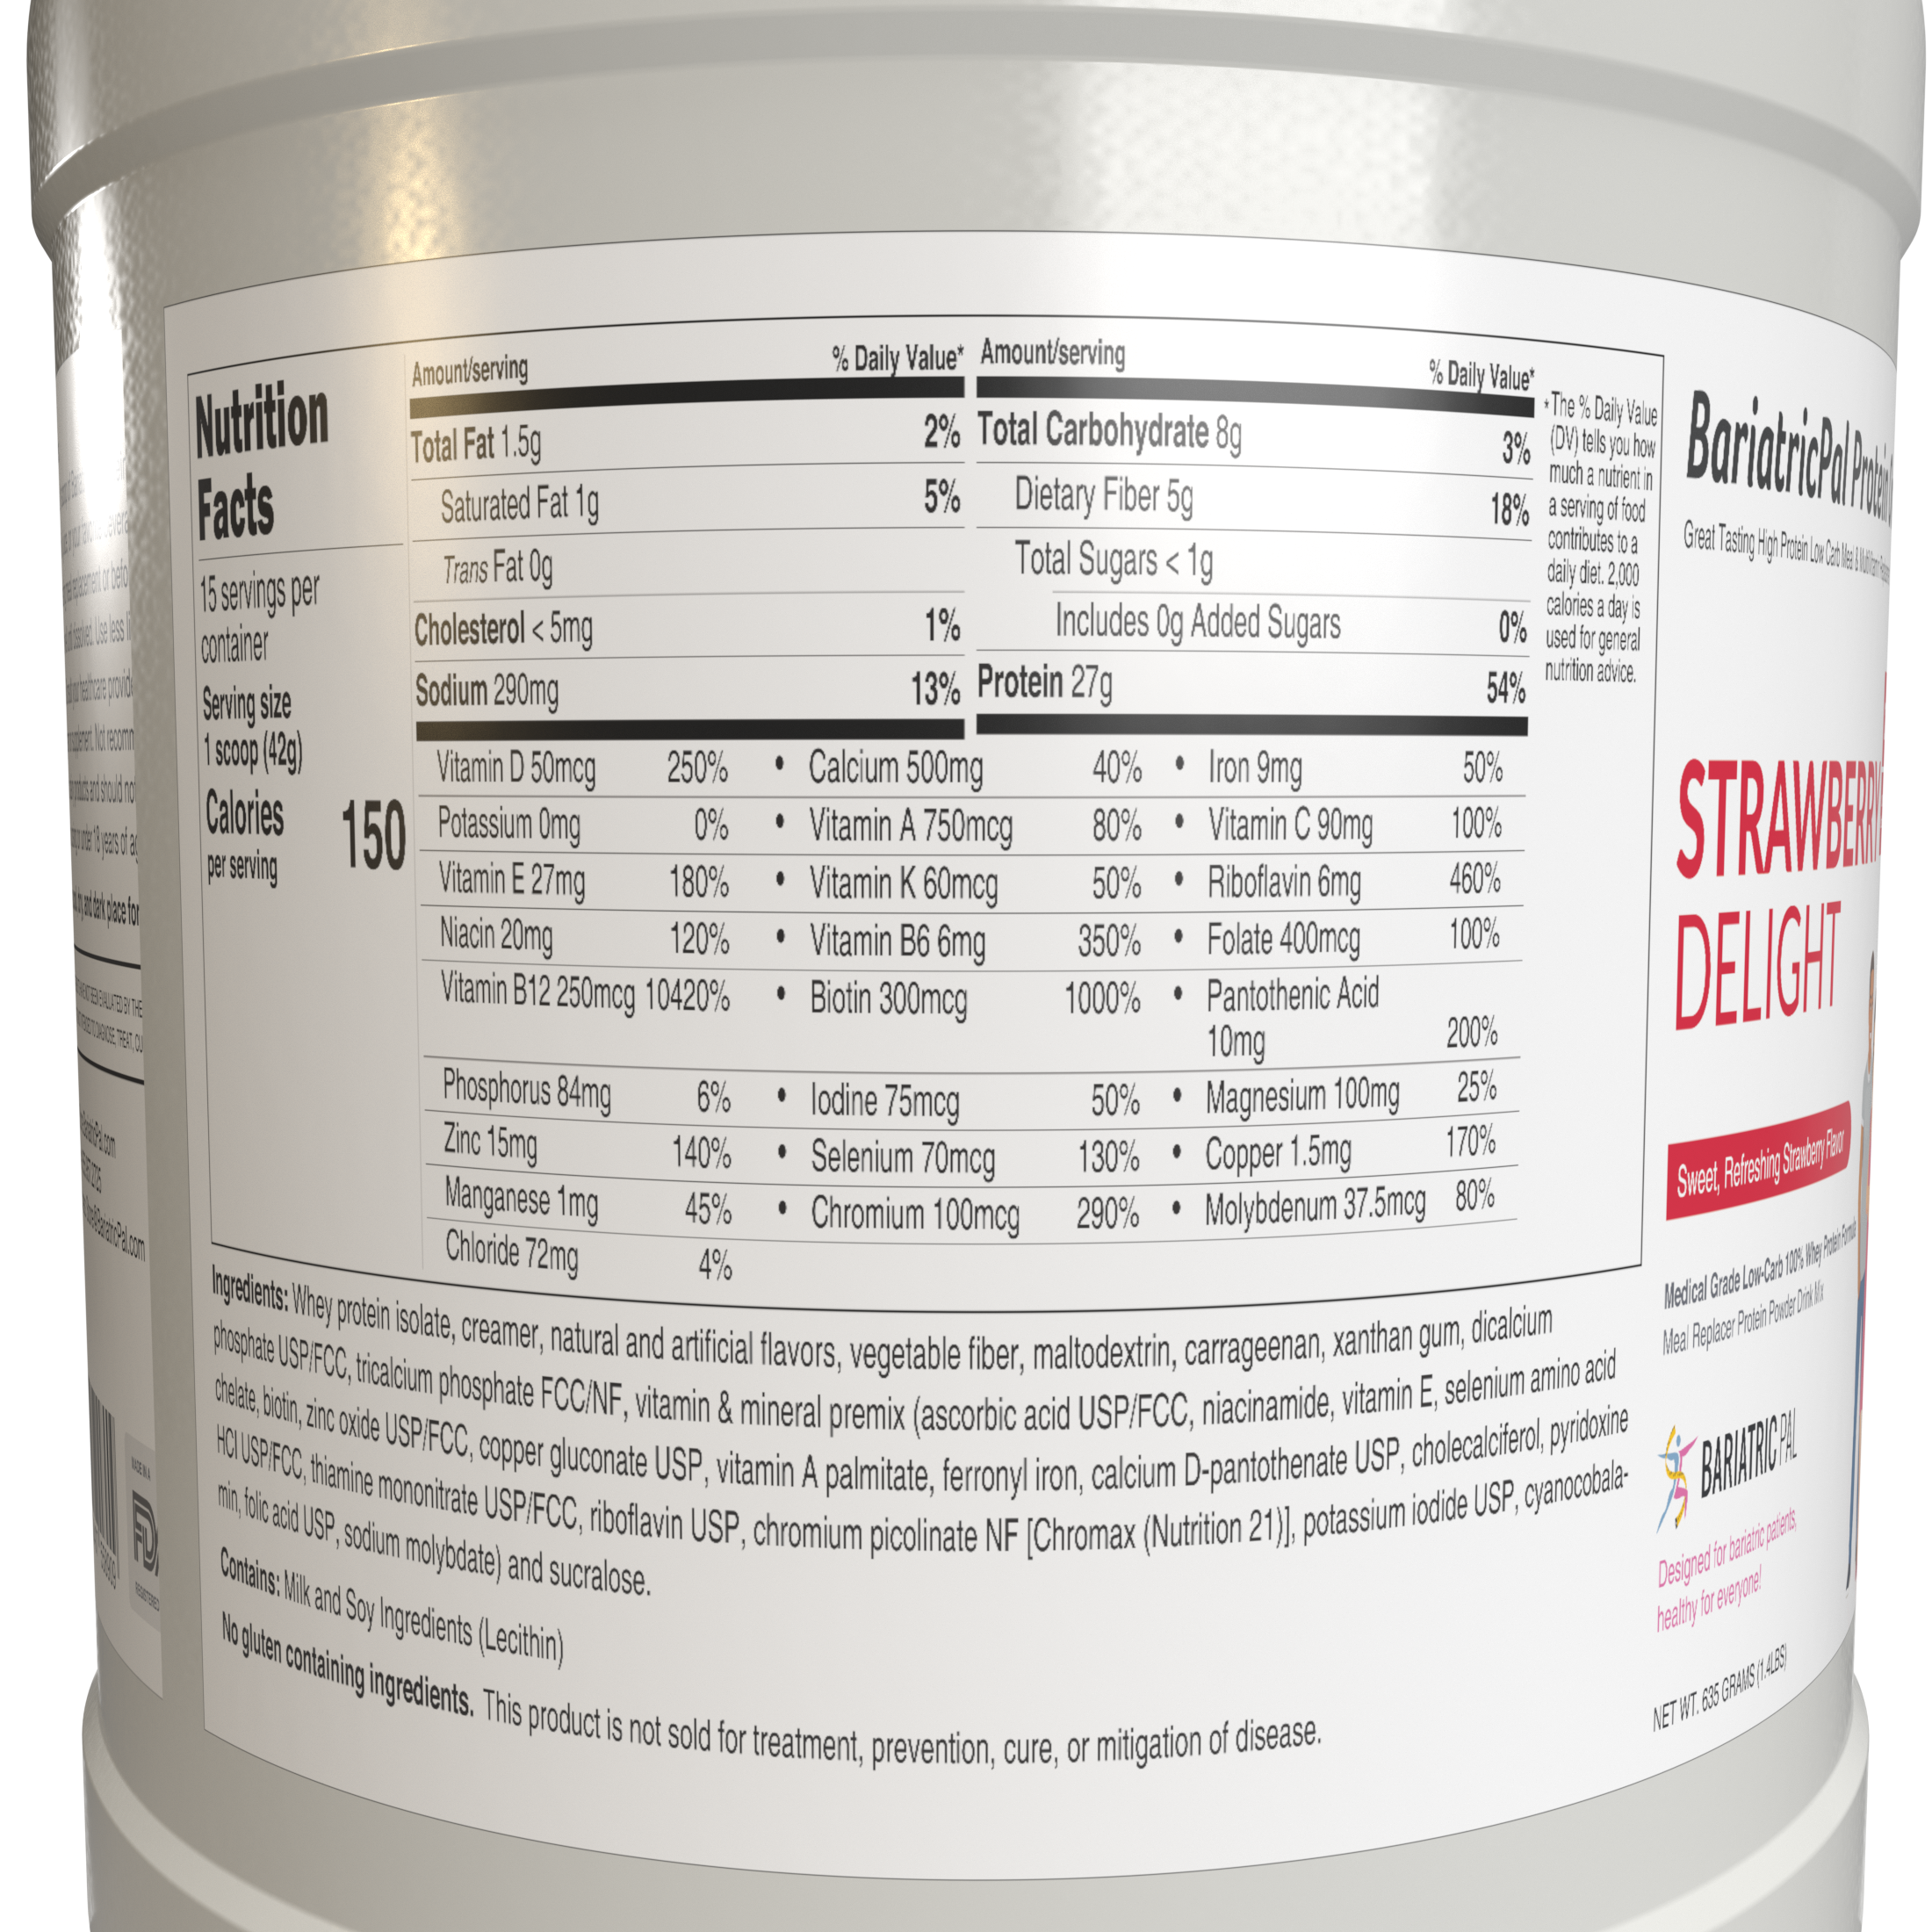 Protein ONE™ Complete Meal Replacement with Multivitamin, Calcium & Iron by BariatricPal - Strawberry Delight (15 Serving Tub) - High-quality Protein Powder Tubs by BariatricPal at 